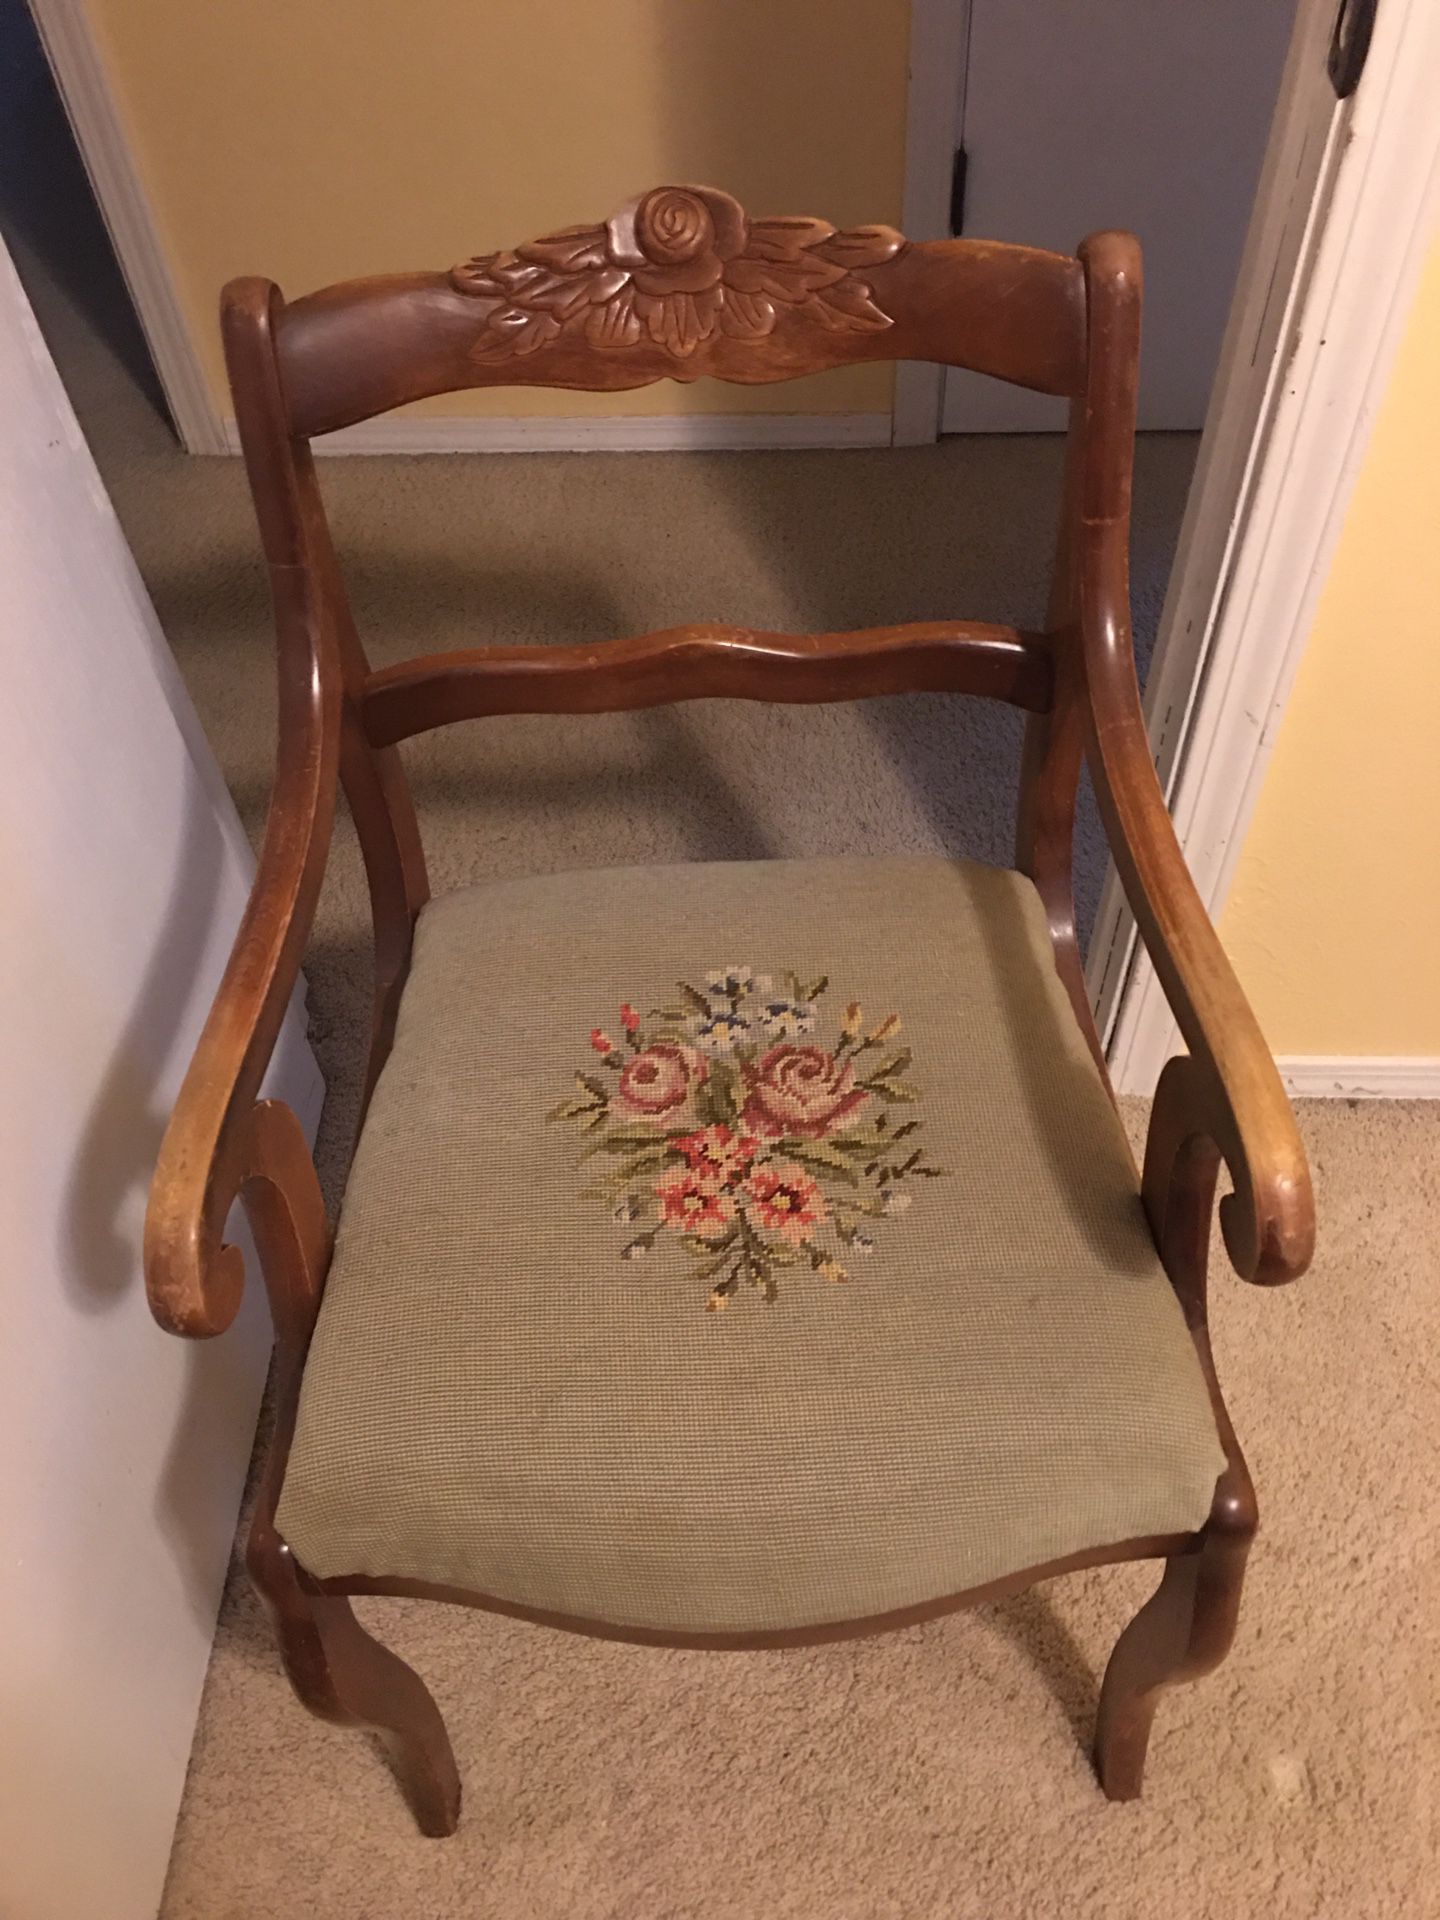 Antique chair with original embroidery